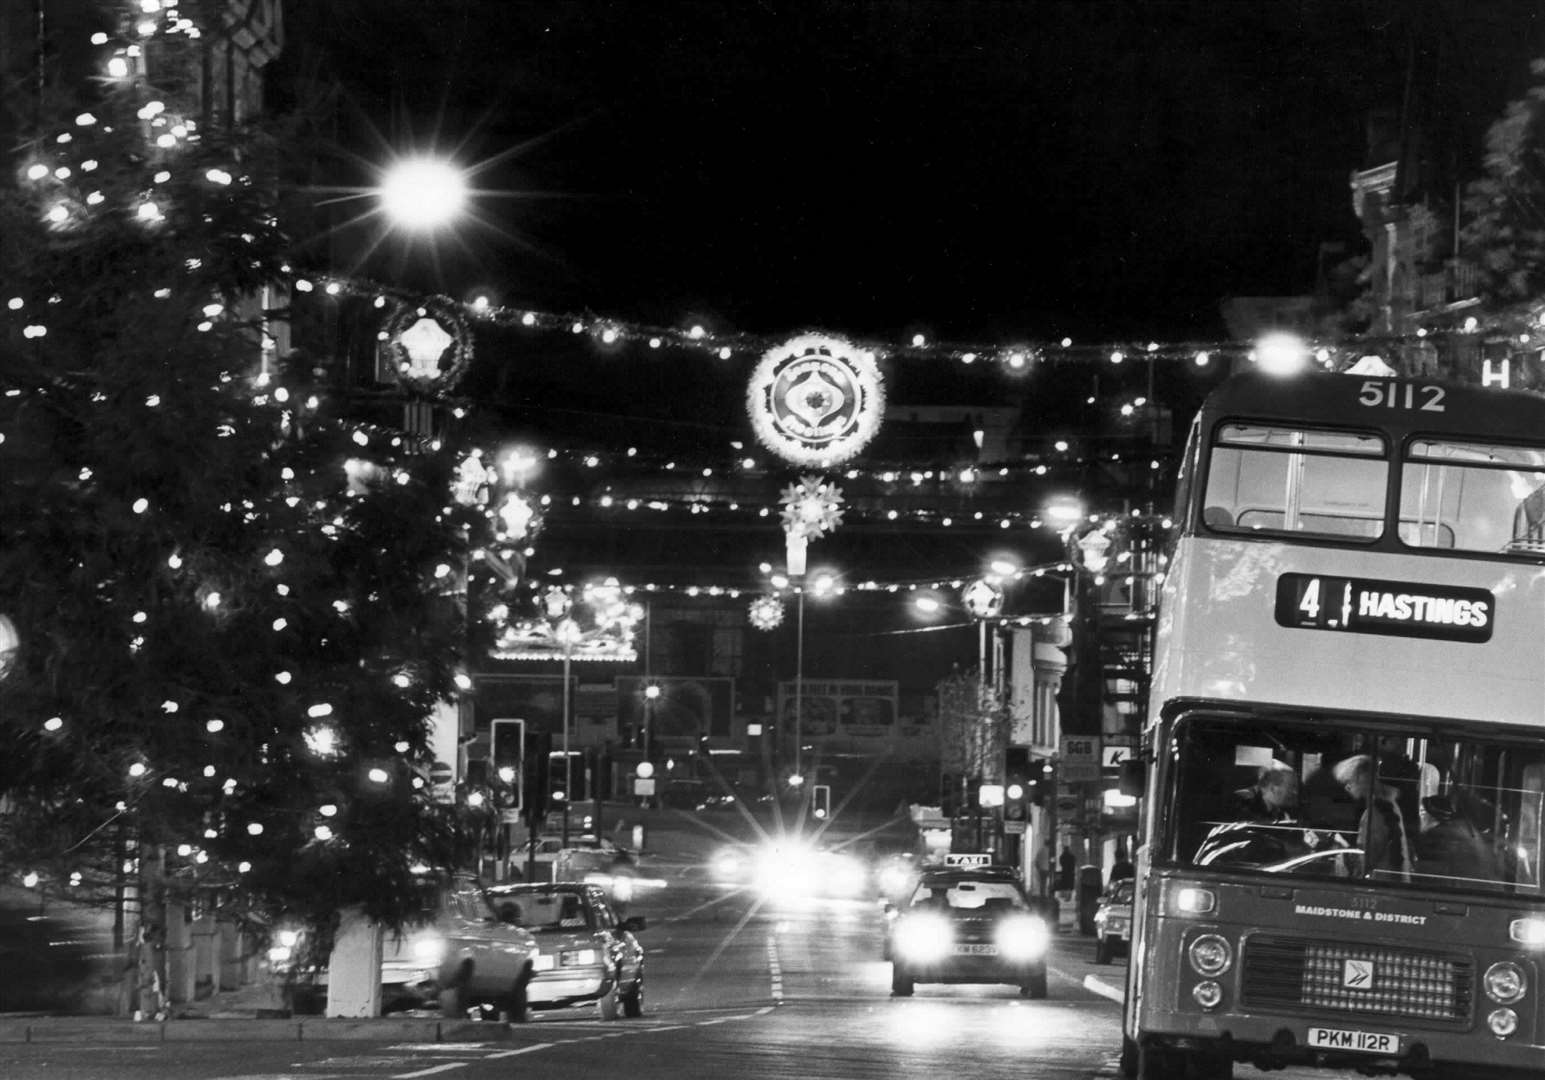 Maidstone's Christmas Lights in 1984